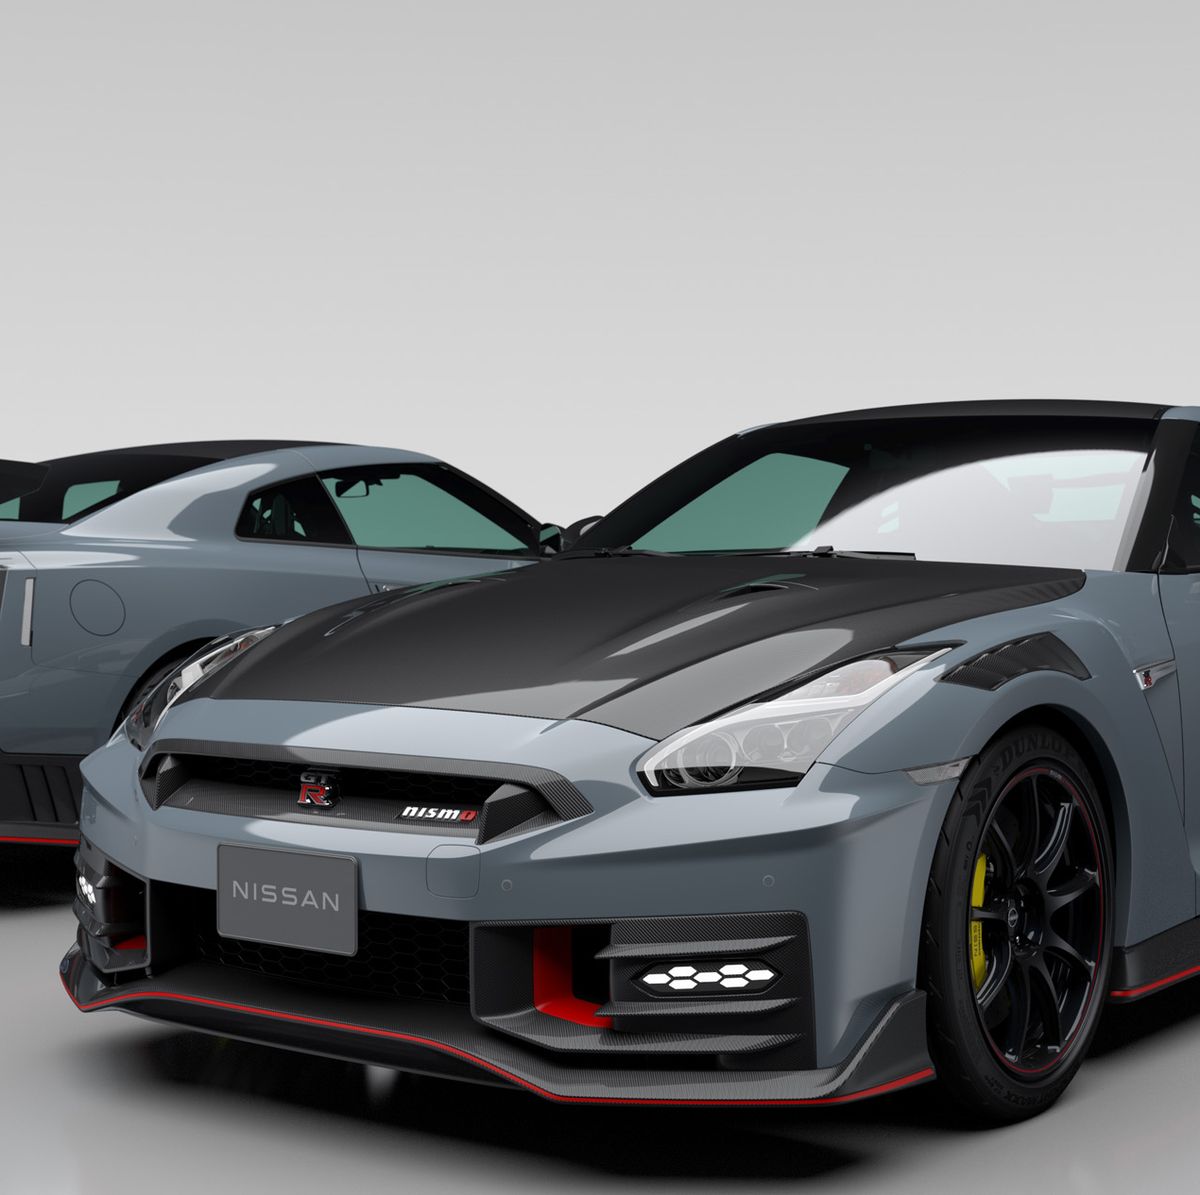 2024 Nissan GT-R Features: Speed, Twin-Turbo V6 Engine & More